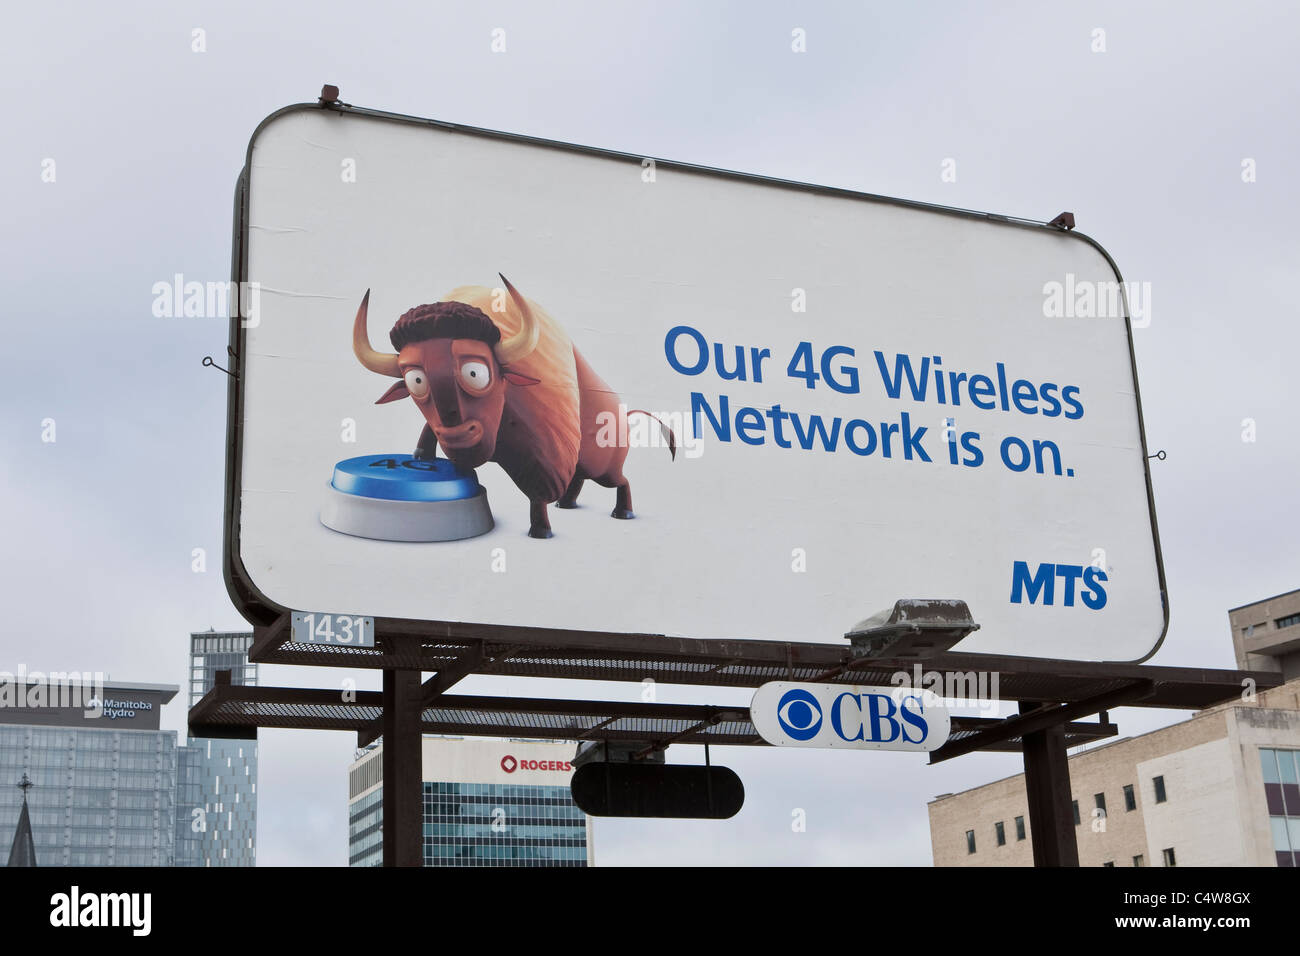 A CBS advertisement billboard for MTS 4G Wireless network is pictured in Winnipeg Monday May 23, 2011. Stock Photo